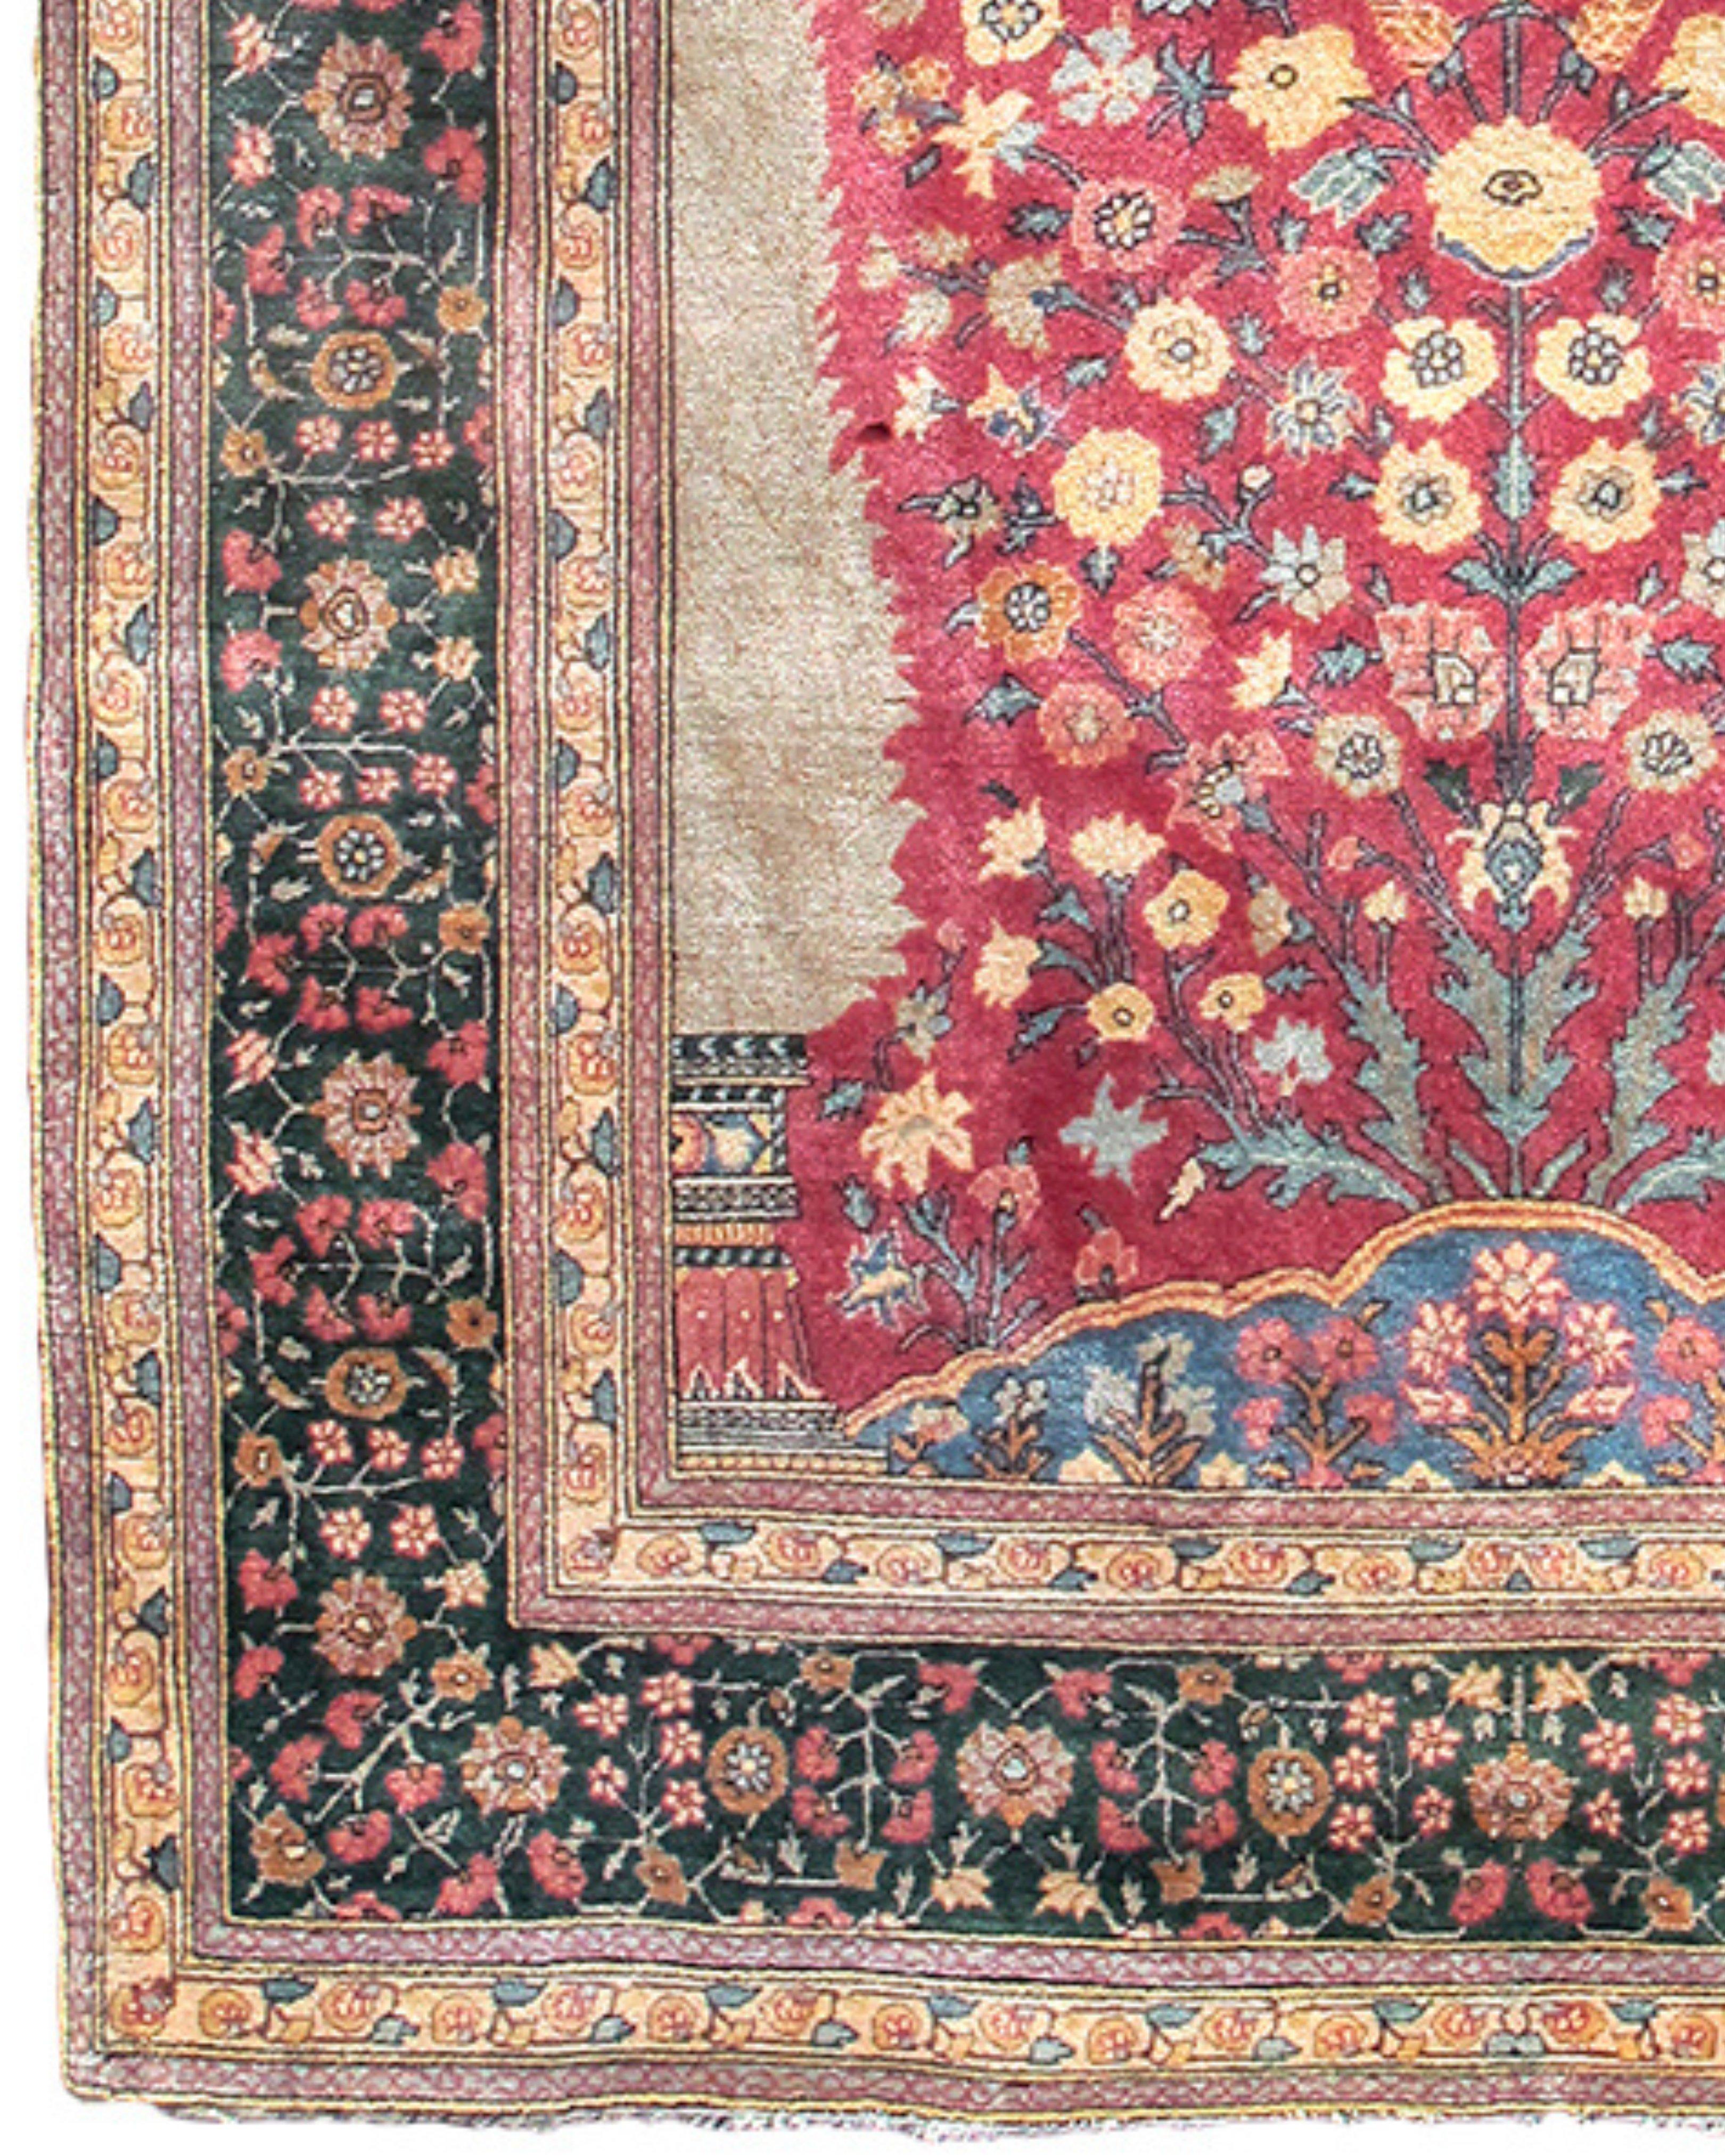 Indian Mille Fleurs Rug, c. 1900 In Excellent Condition For Sale In San Francisco, CA